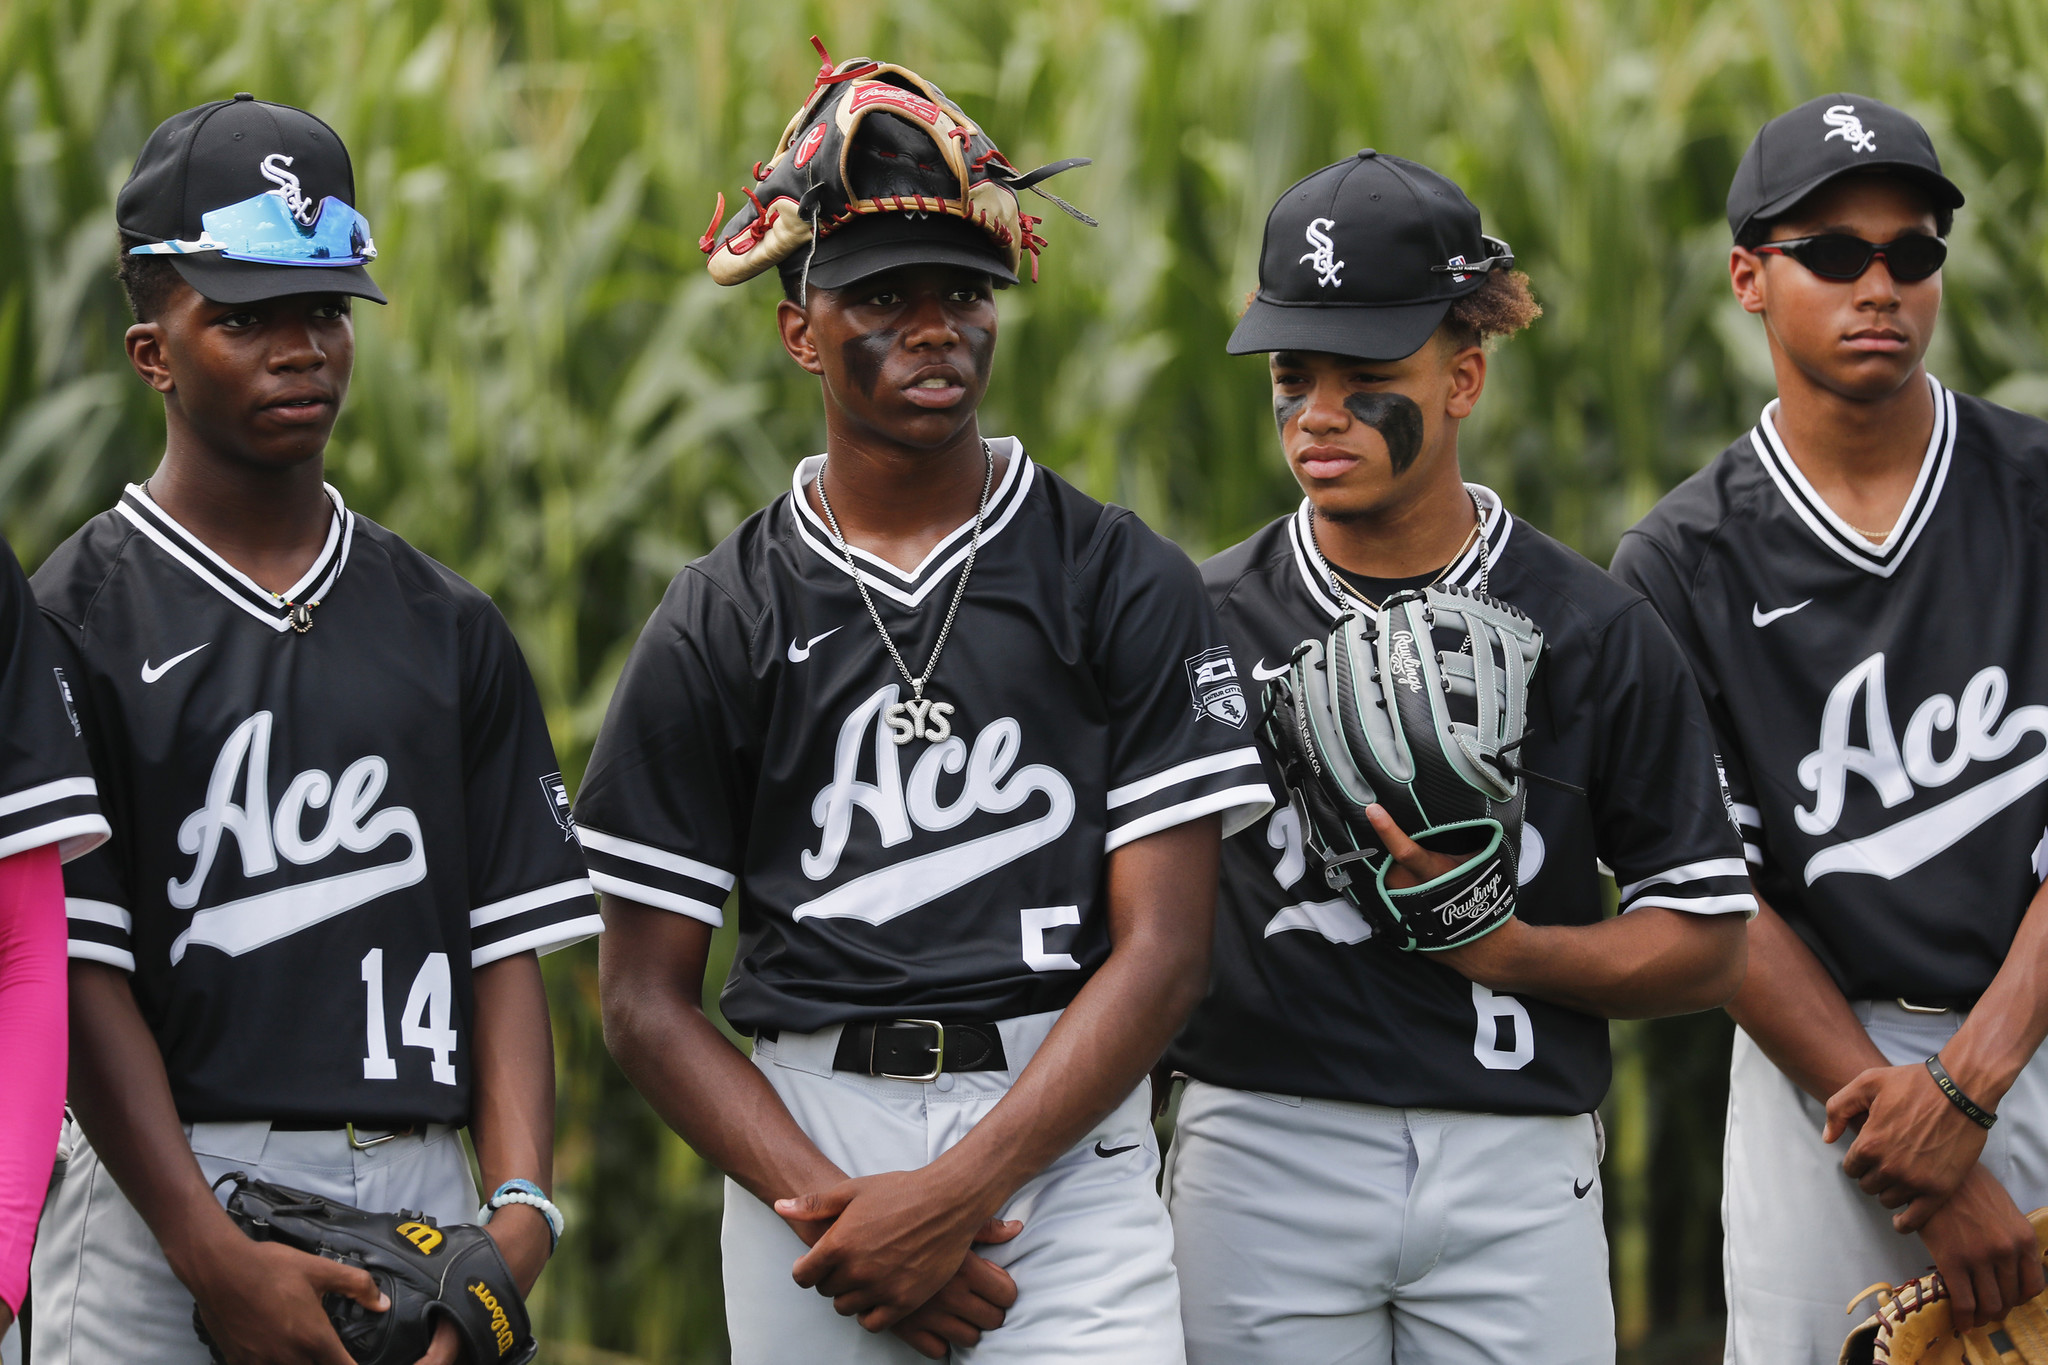 The Field of Dreams uniforms for the Yankees and White Sox were so